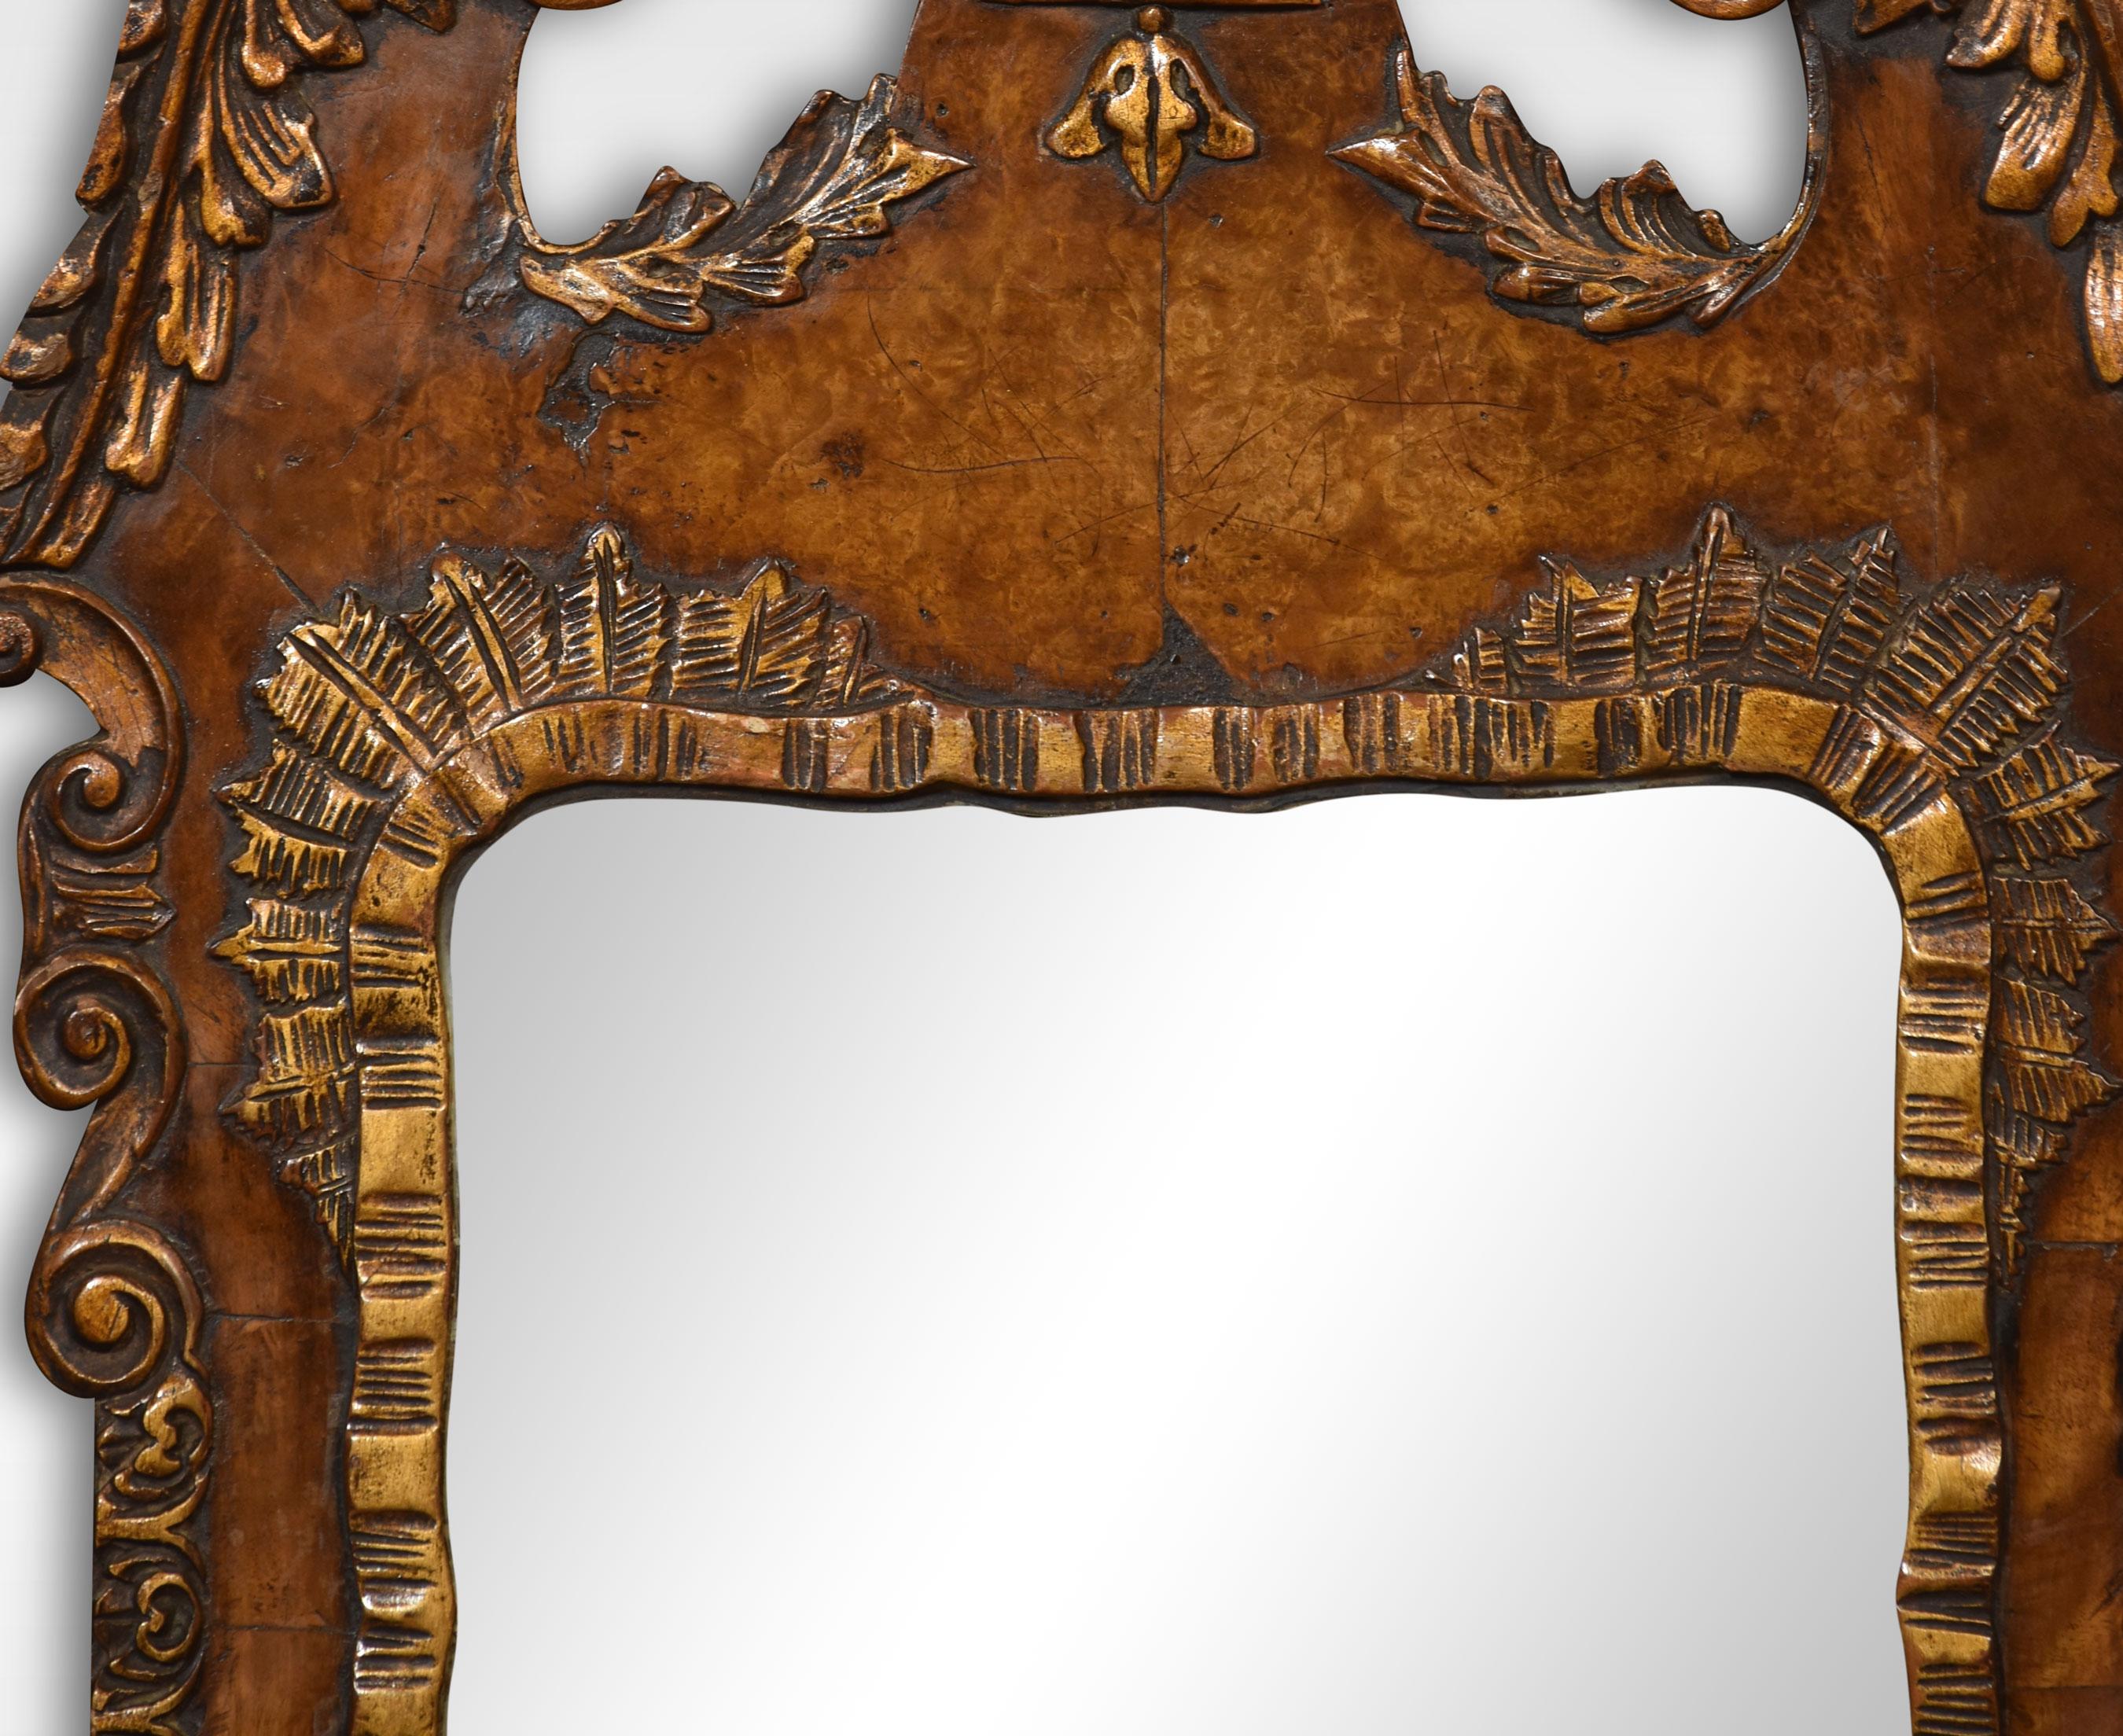 Walnut and parcel gilt wall mirror. The original rectangular mirror plate is surrounded by a walnut frame with carvings and applied scrolling decoration.
Dimensions
Height 40.5 Inches
Width 21.5 Inches
Depth 3 Inches